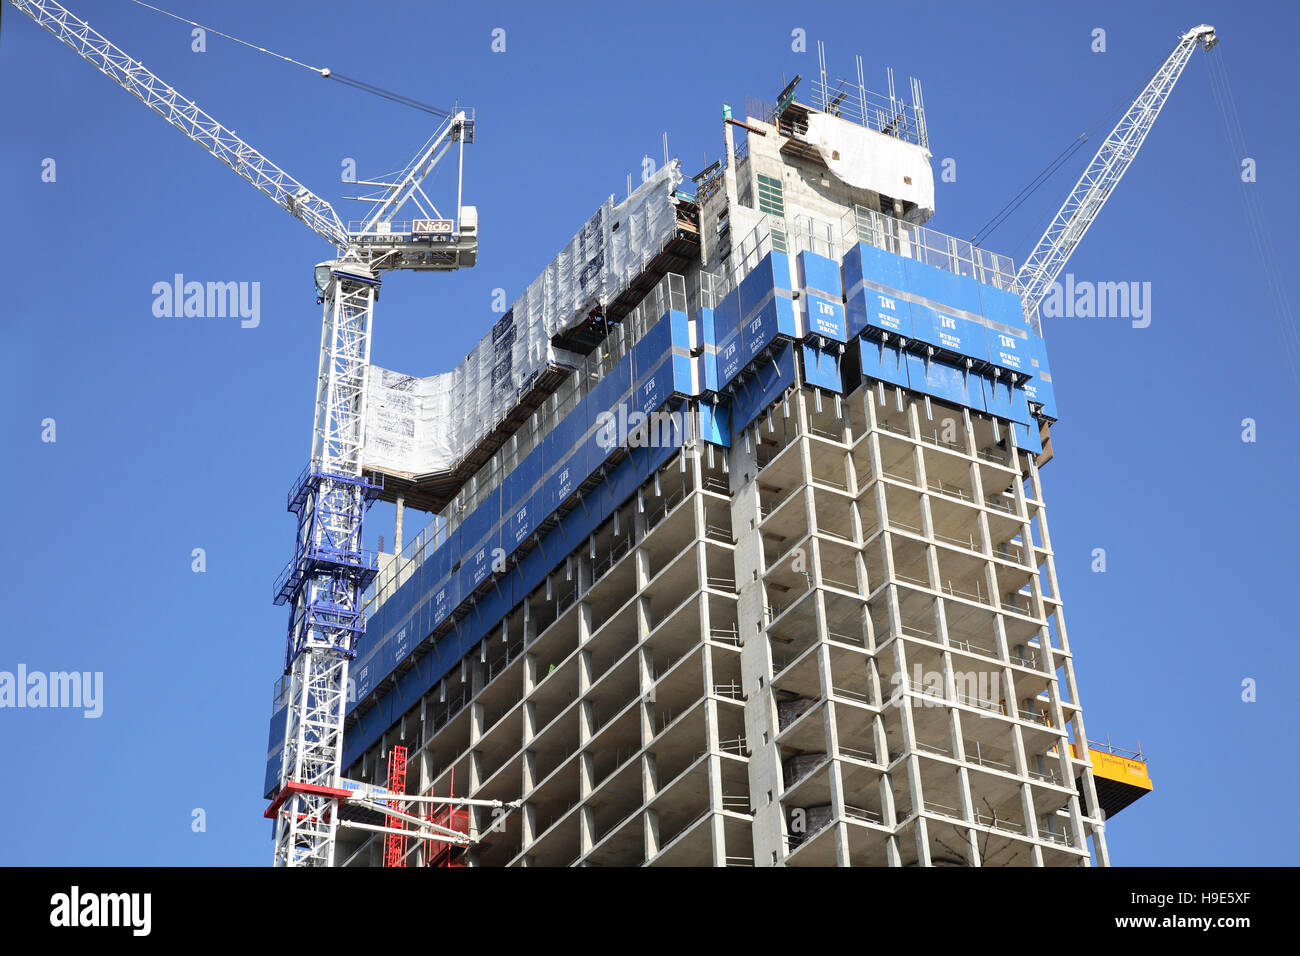 Construction of a new, concrete framed tower block in Central London, UK. Shows tower crane and climbing, protective screens. Stock Photo